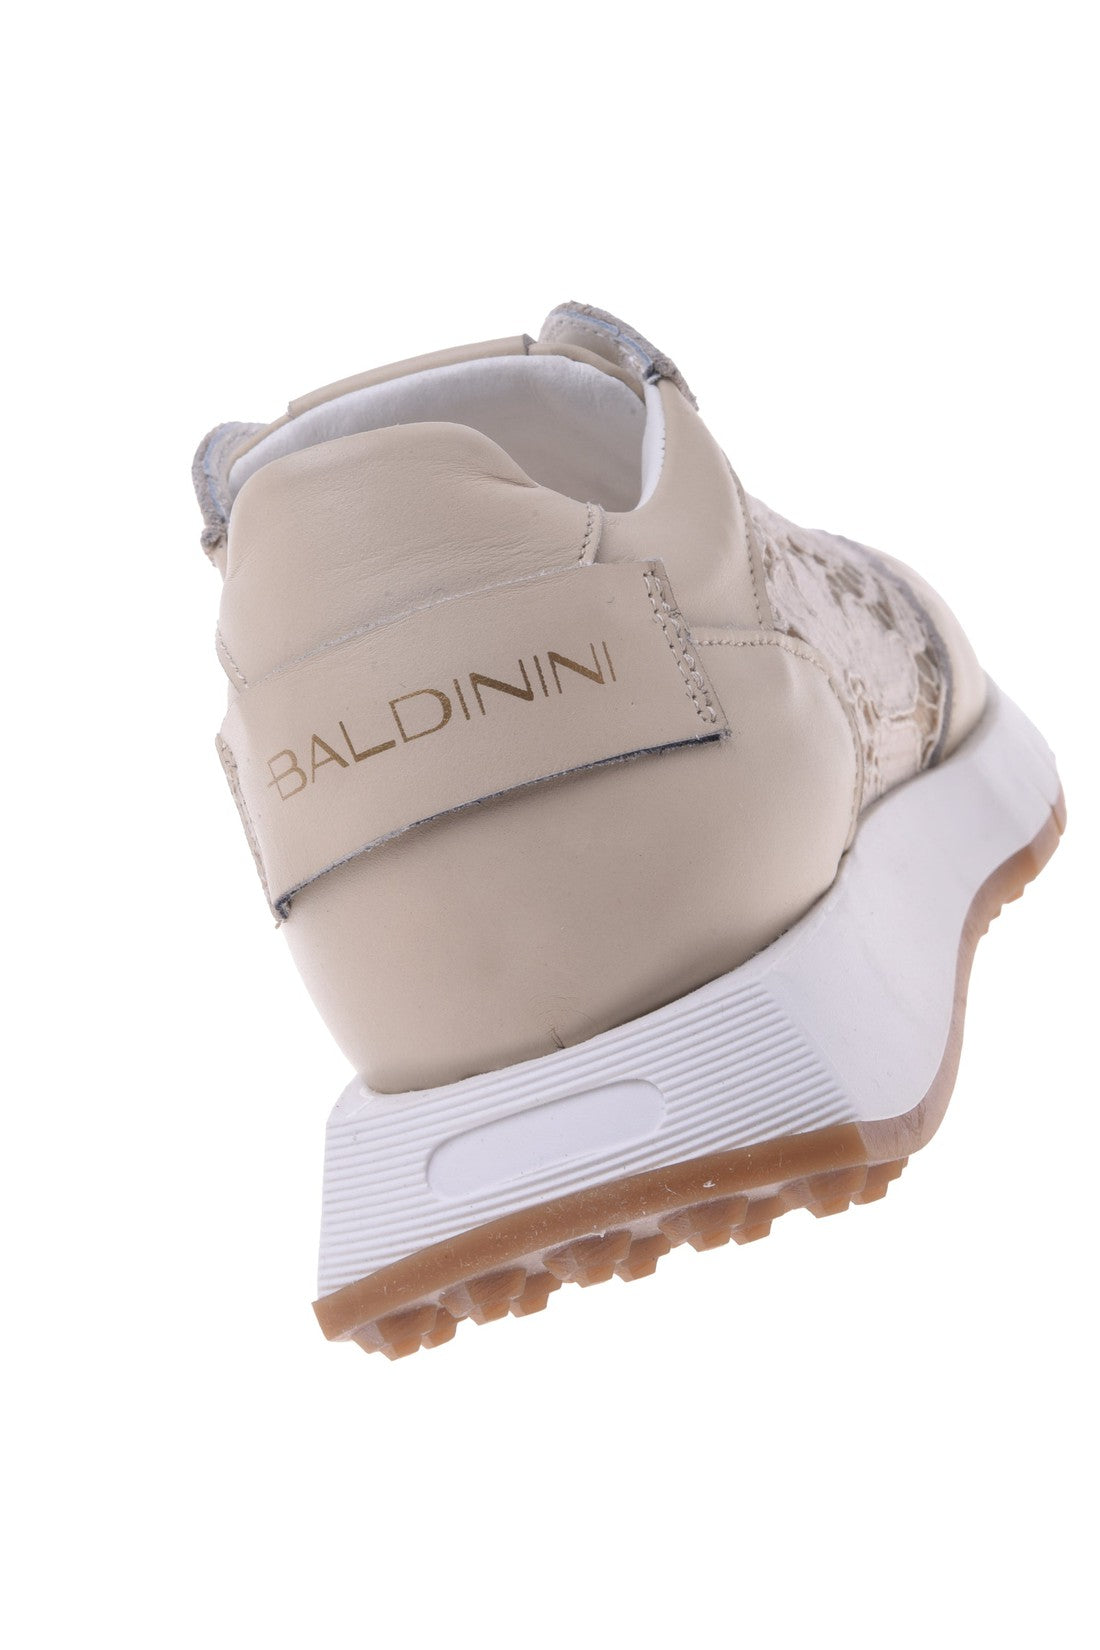 BALDININI-OUTLET-SALE-Sneaker-in-nude-nappa-leather-and-lace-Sneaker-ARCHIVE-COLLECTION-4.jpg